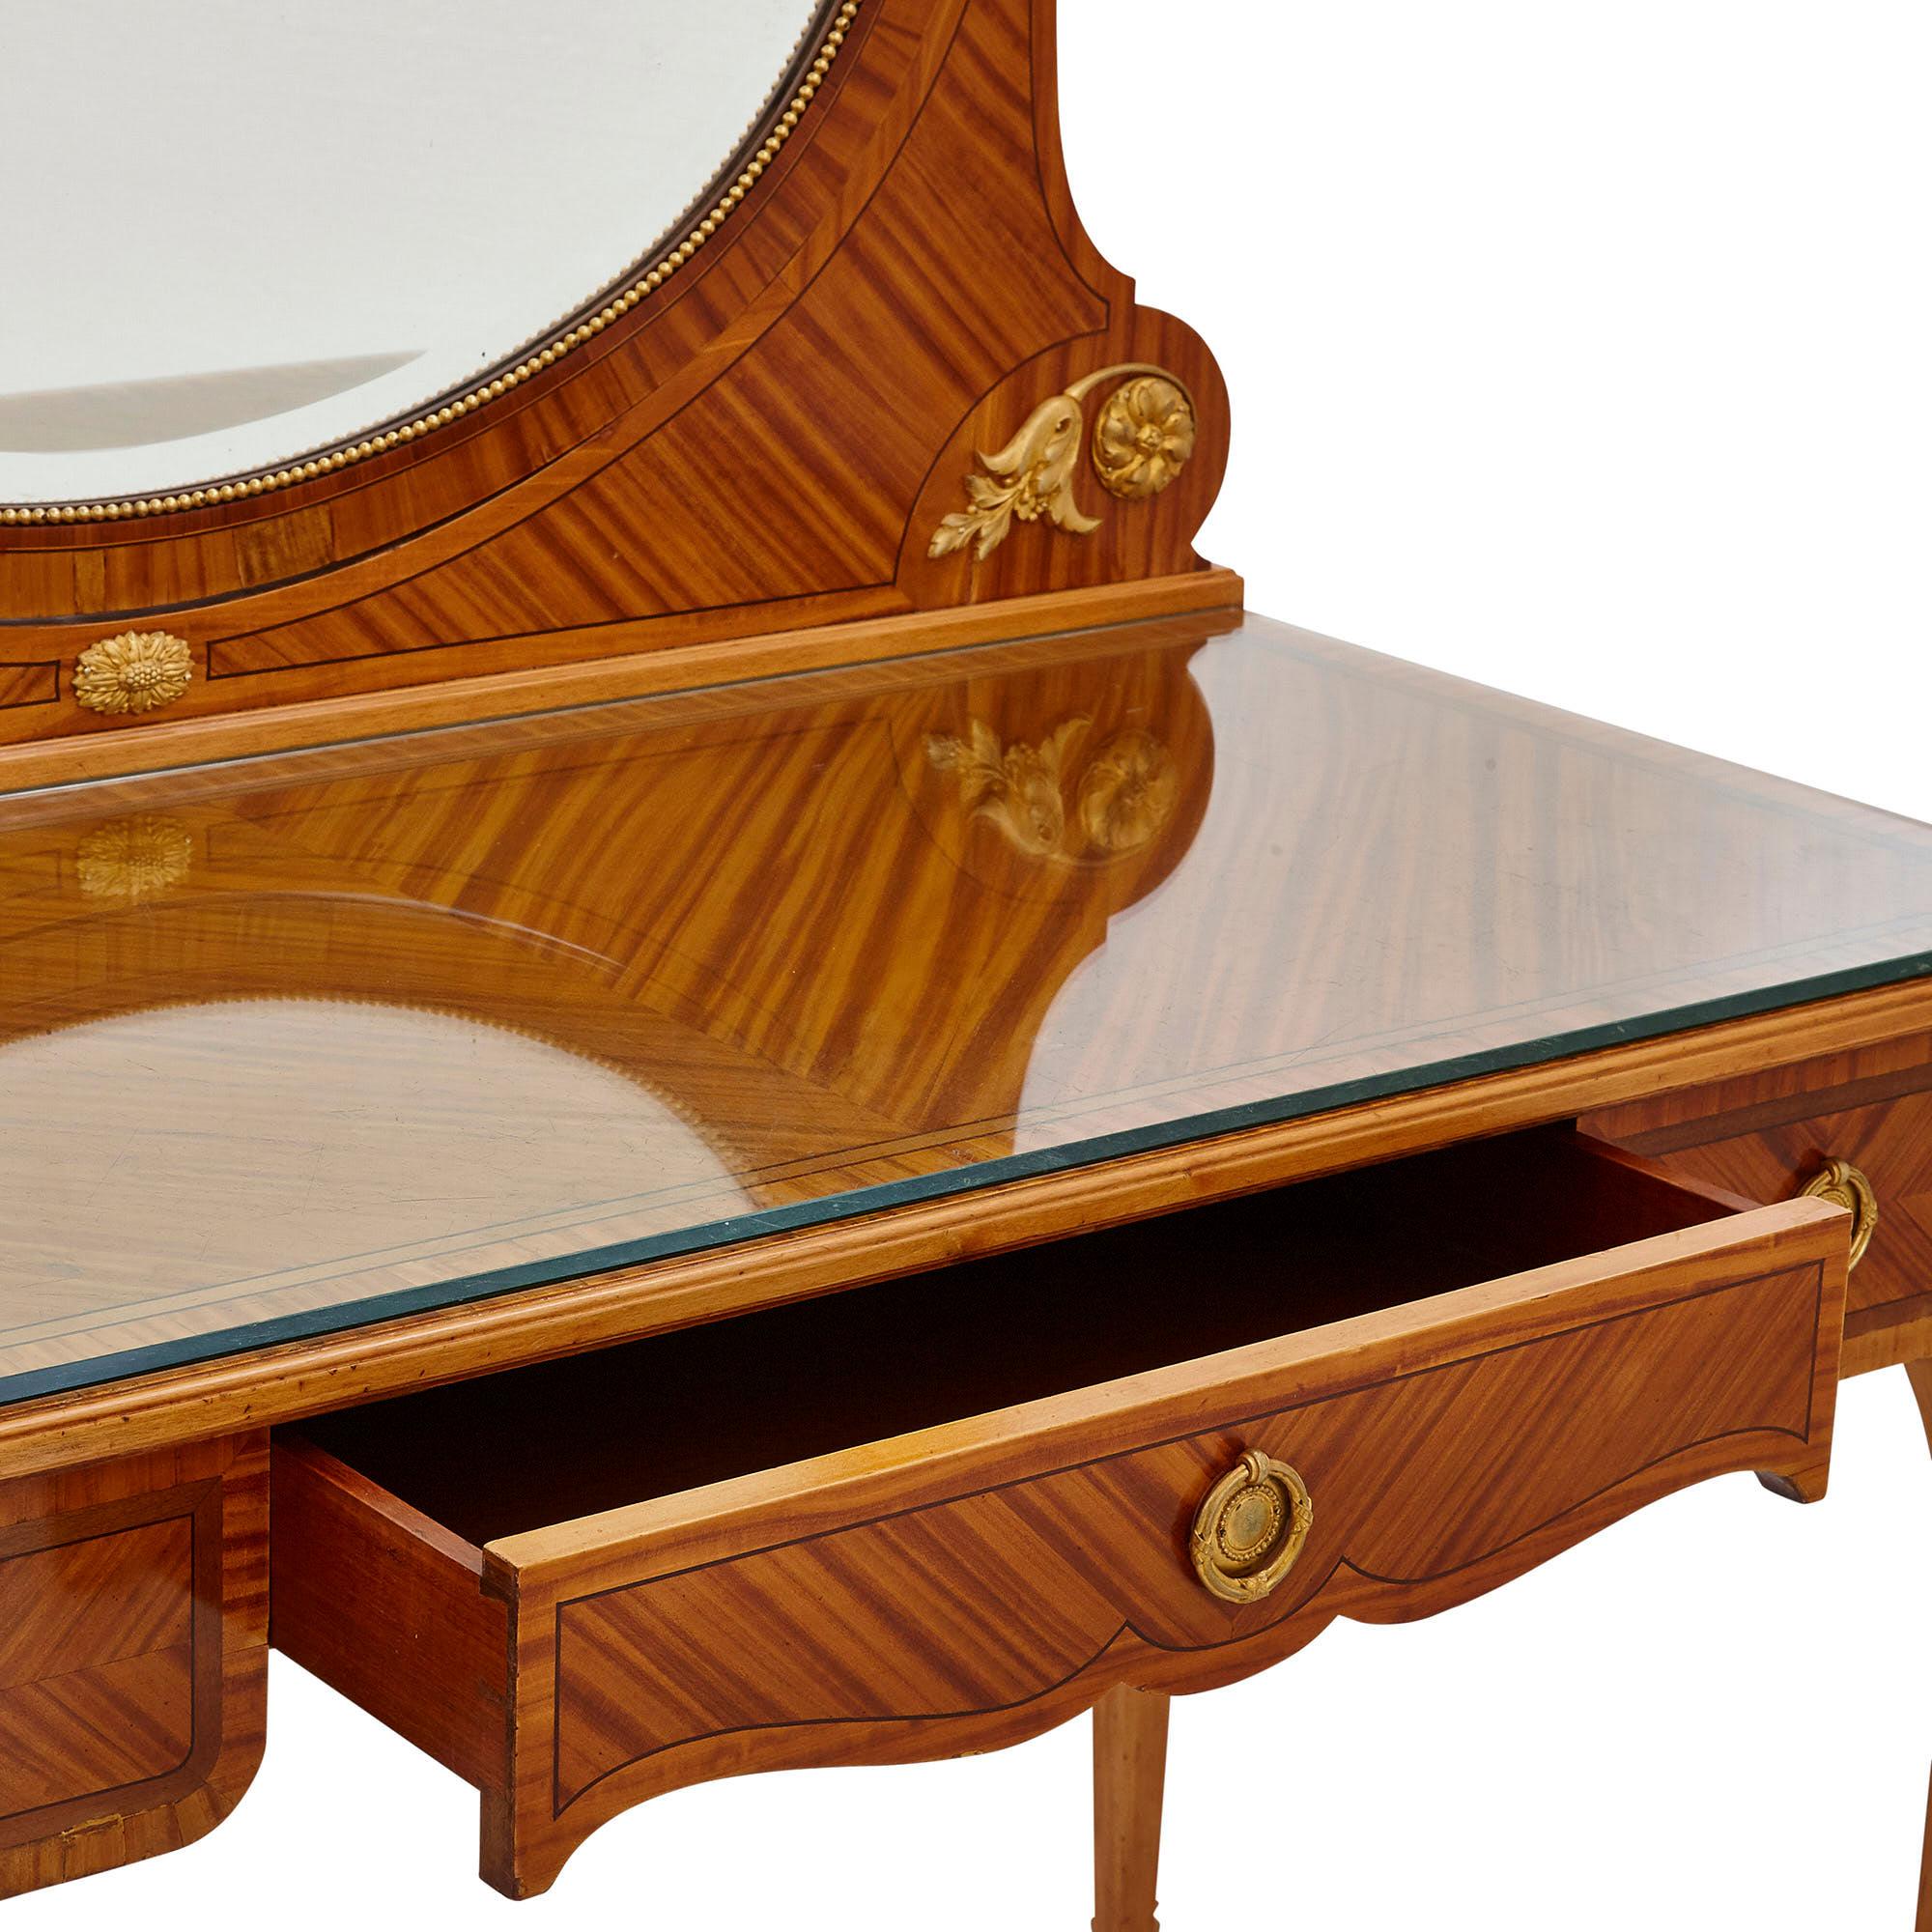 19th Century Antique Parisian Neoclassical Style Dressing Table Set by Au Gros Chêne For Sale